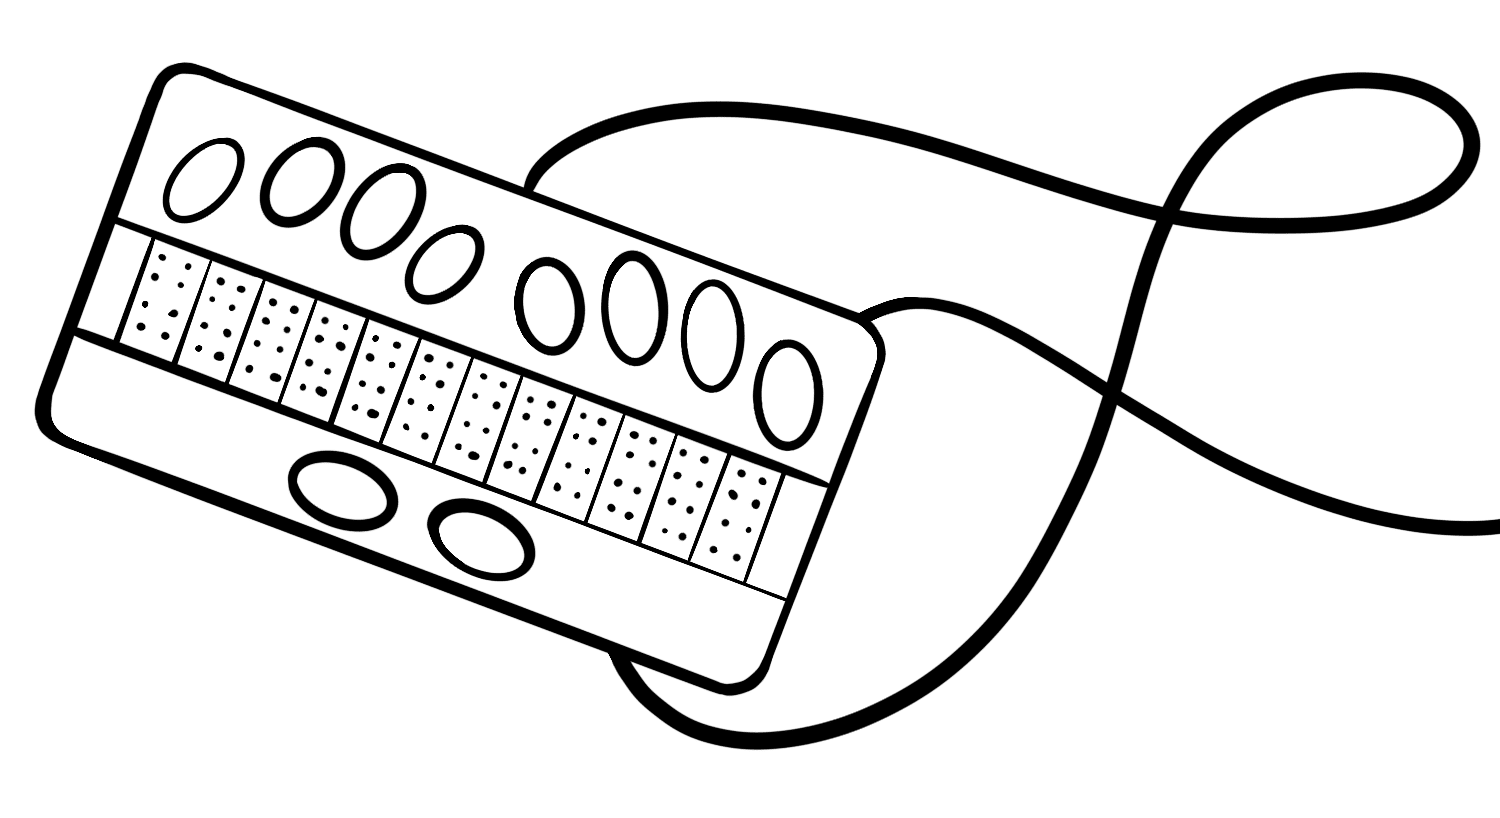 Braille Display